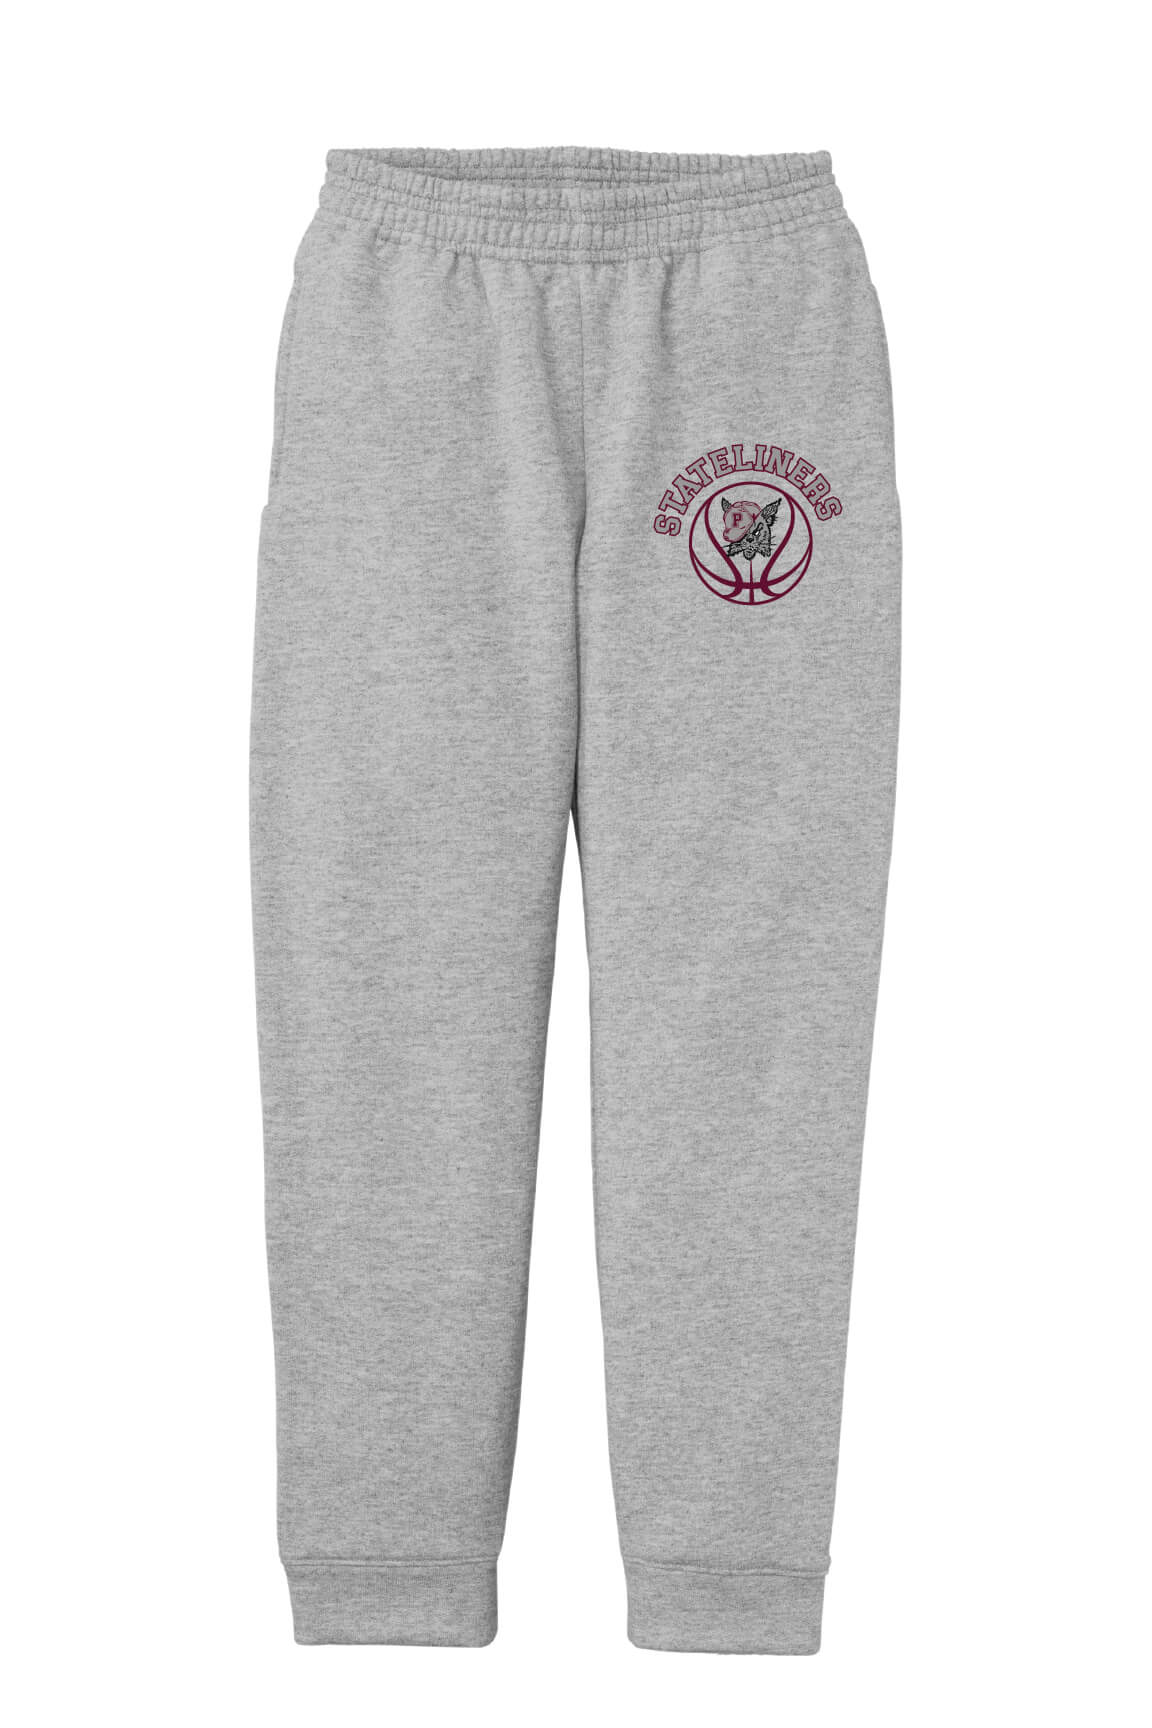 Fleece Jogger (Youth) Stateliners